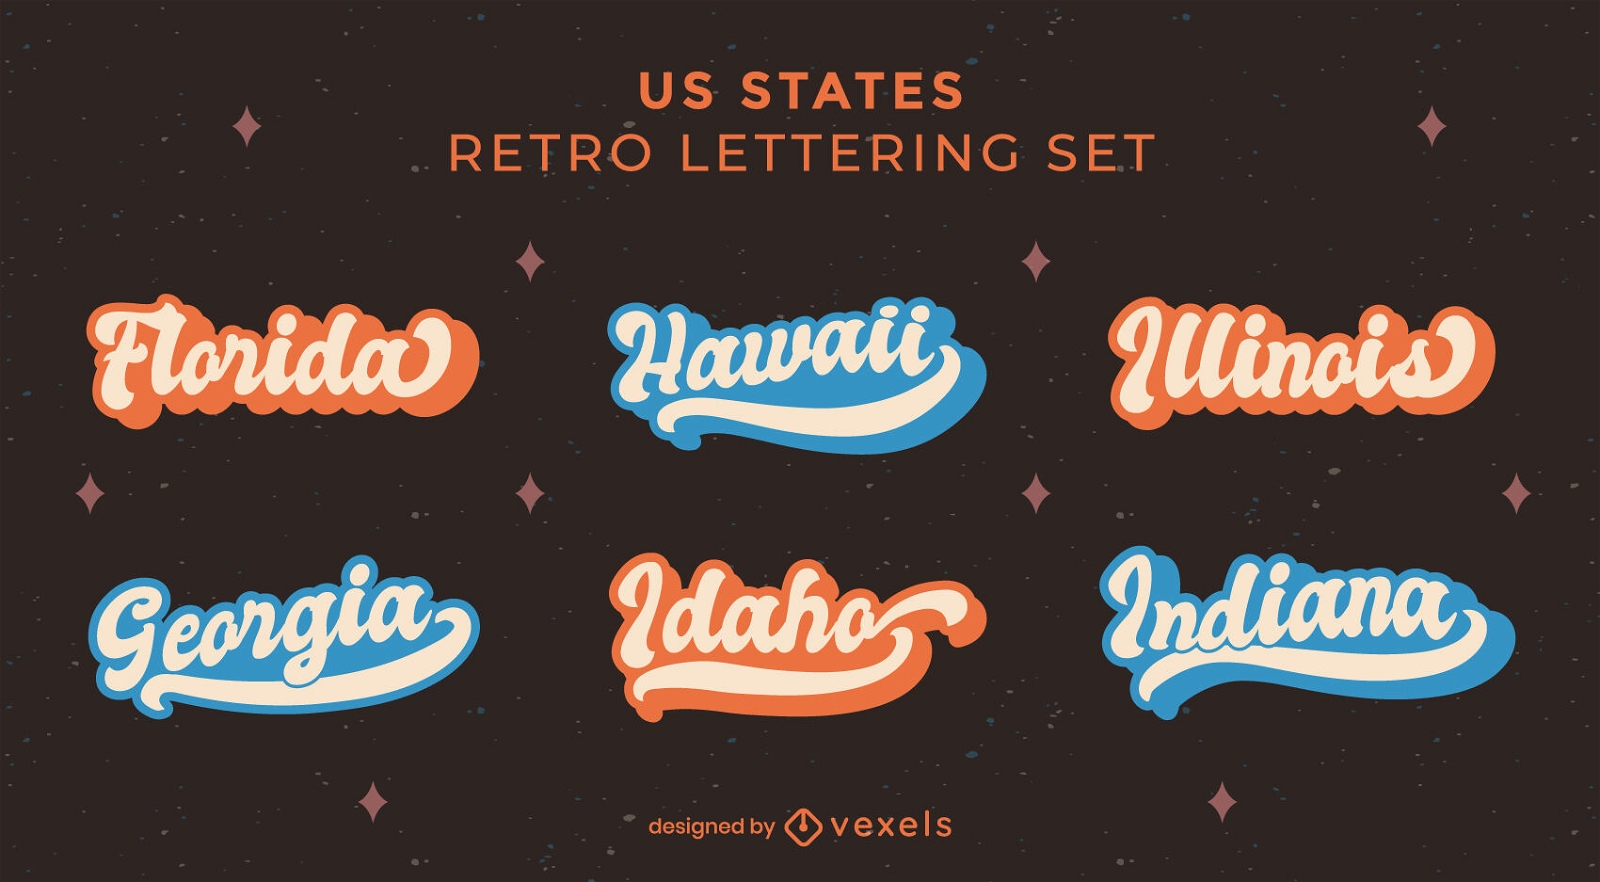 American state names retro lettering set